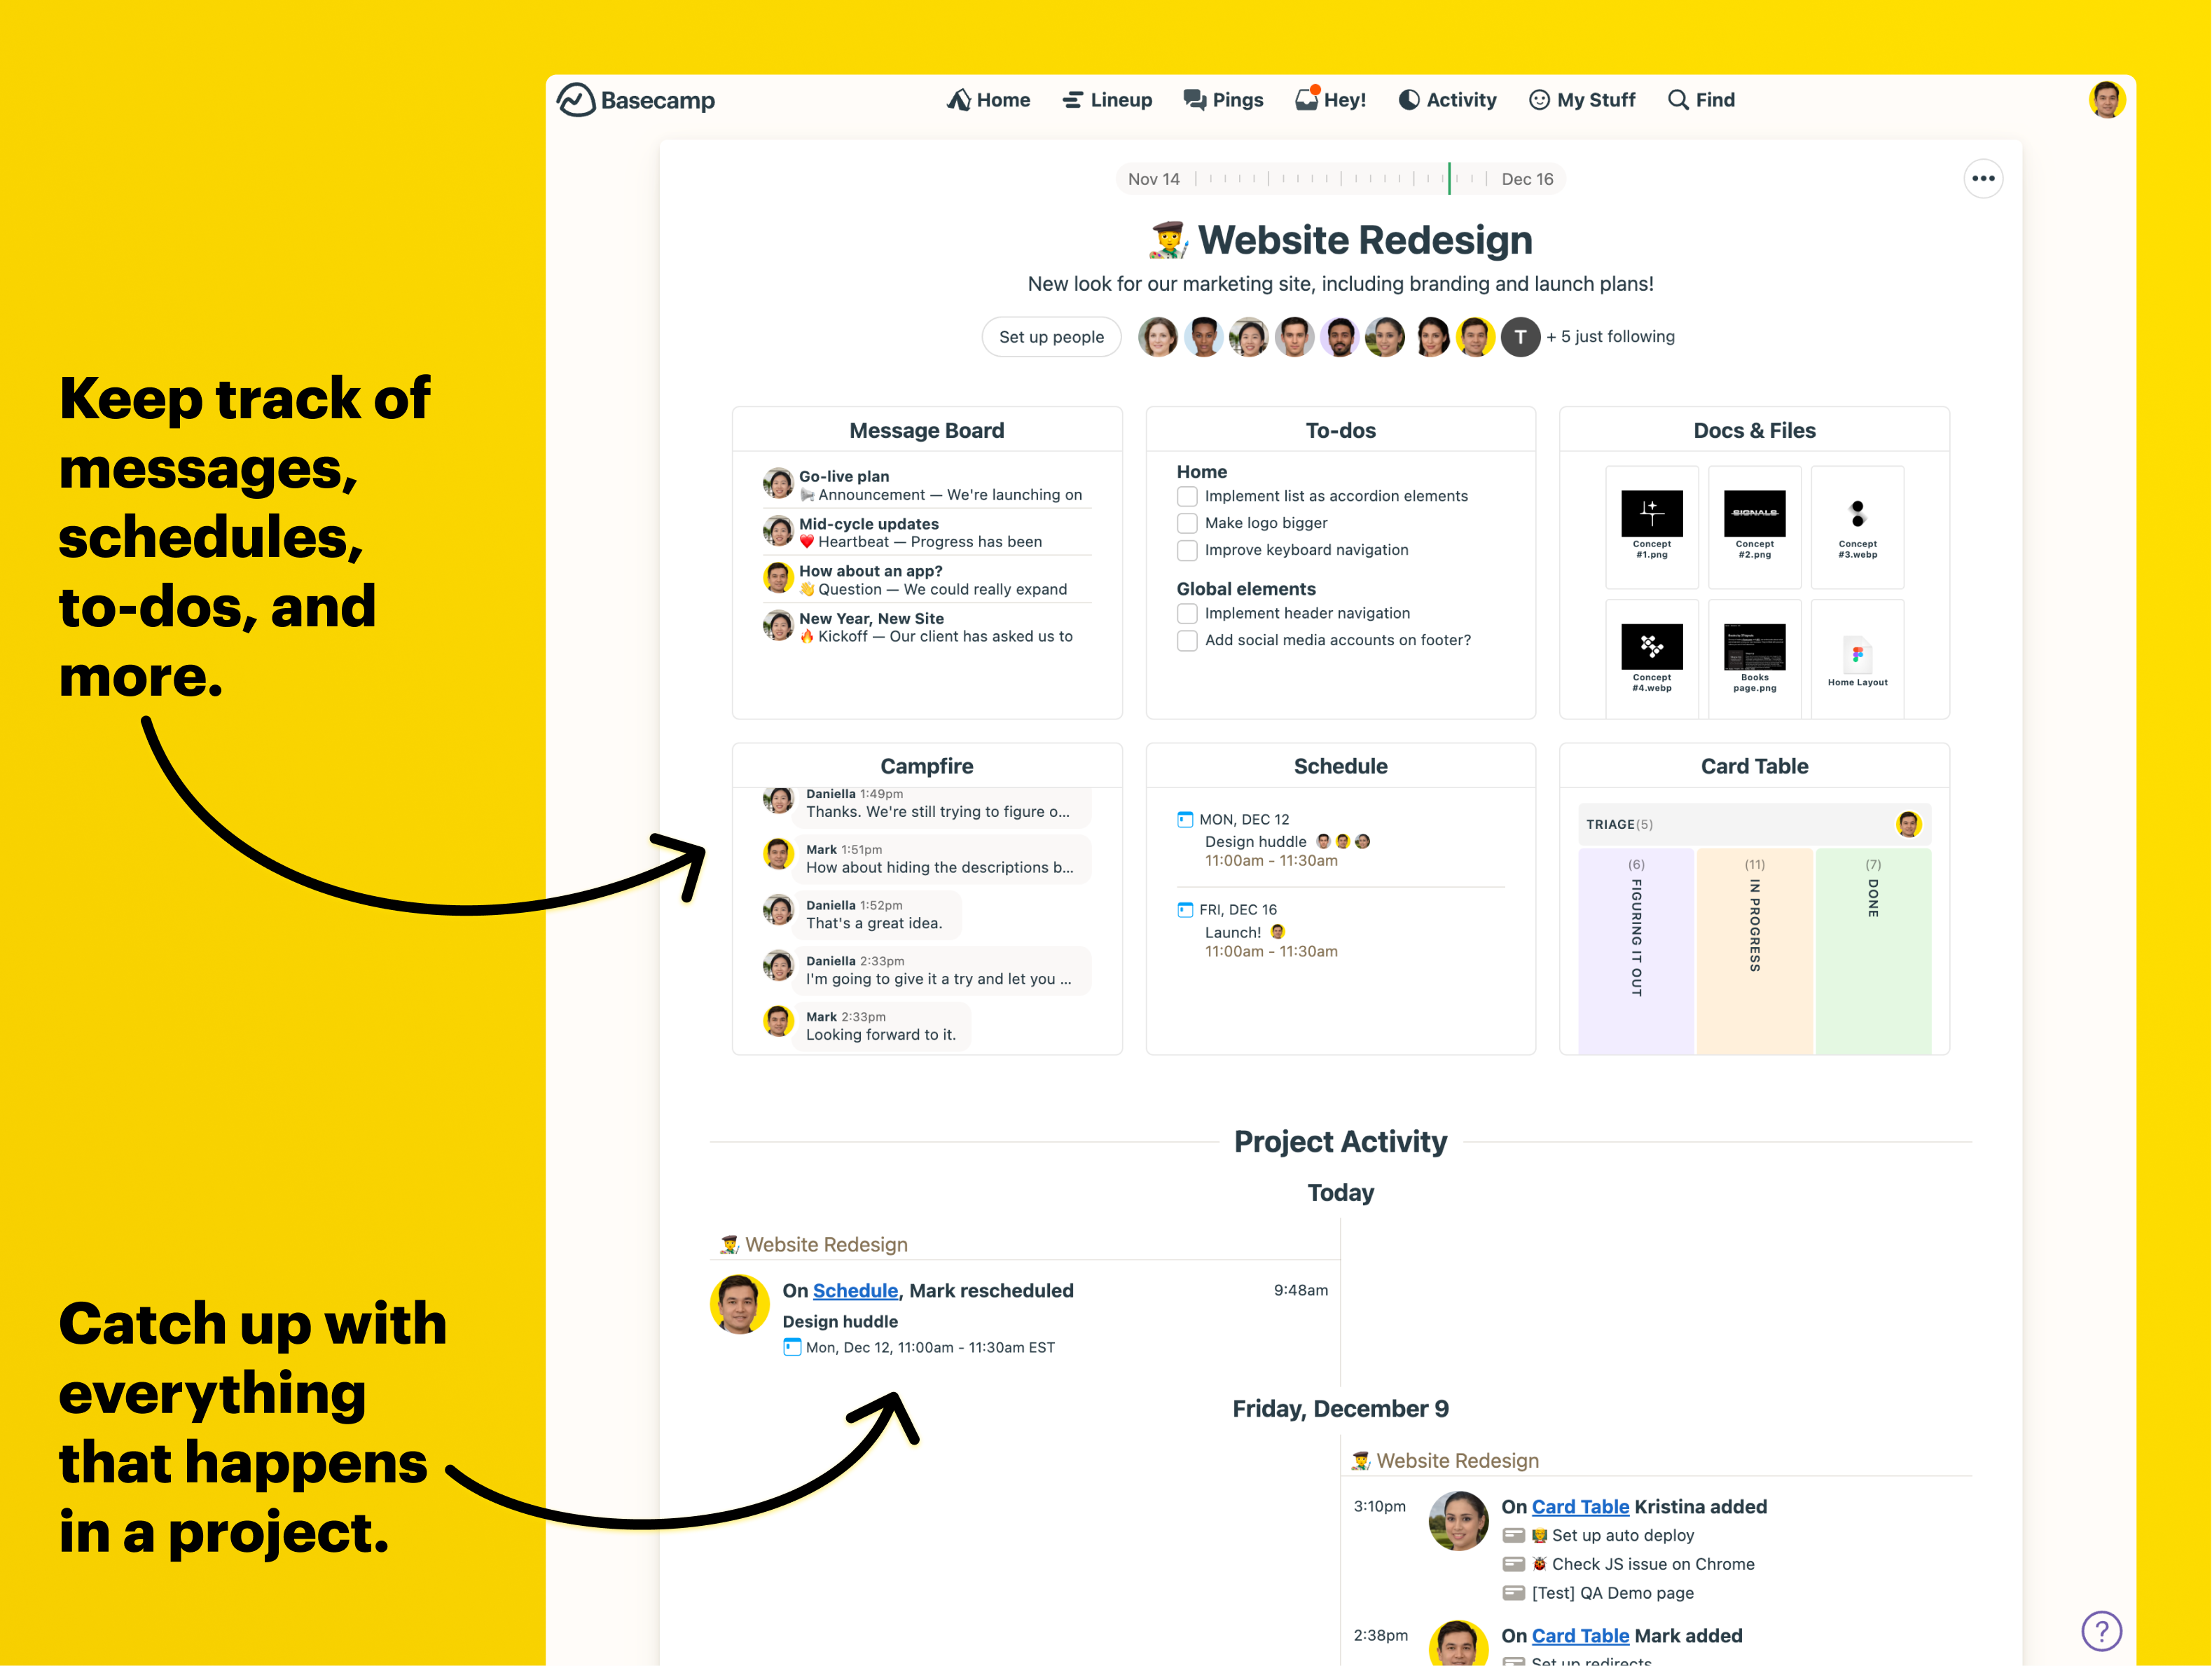 Projects are at the heart of Basecamp. They include all the tools you may need to manage your team, like messages, to-dos, files, chat, and Card Table, our take on Kanban.